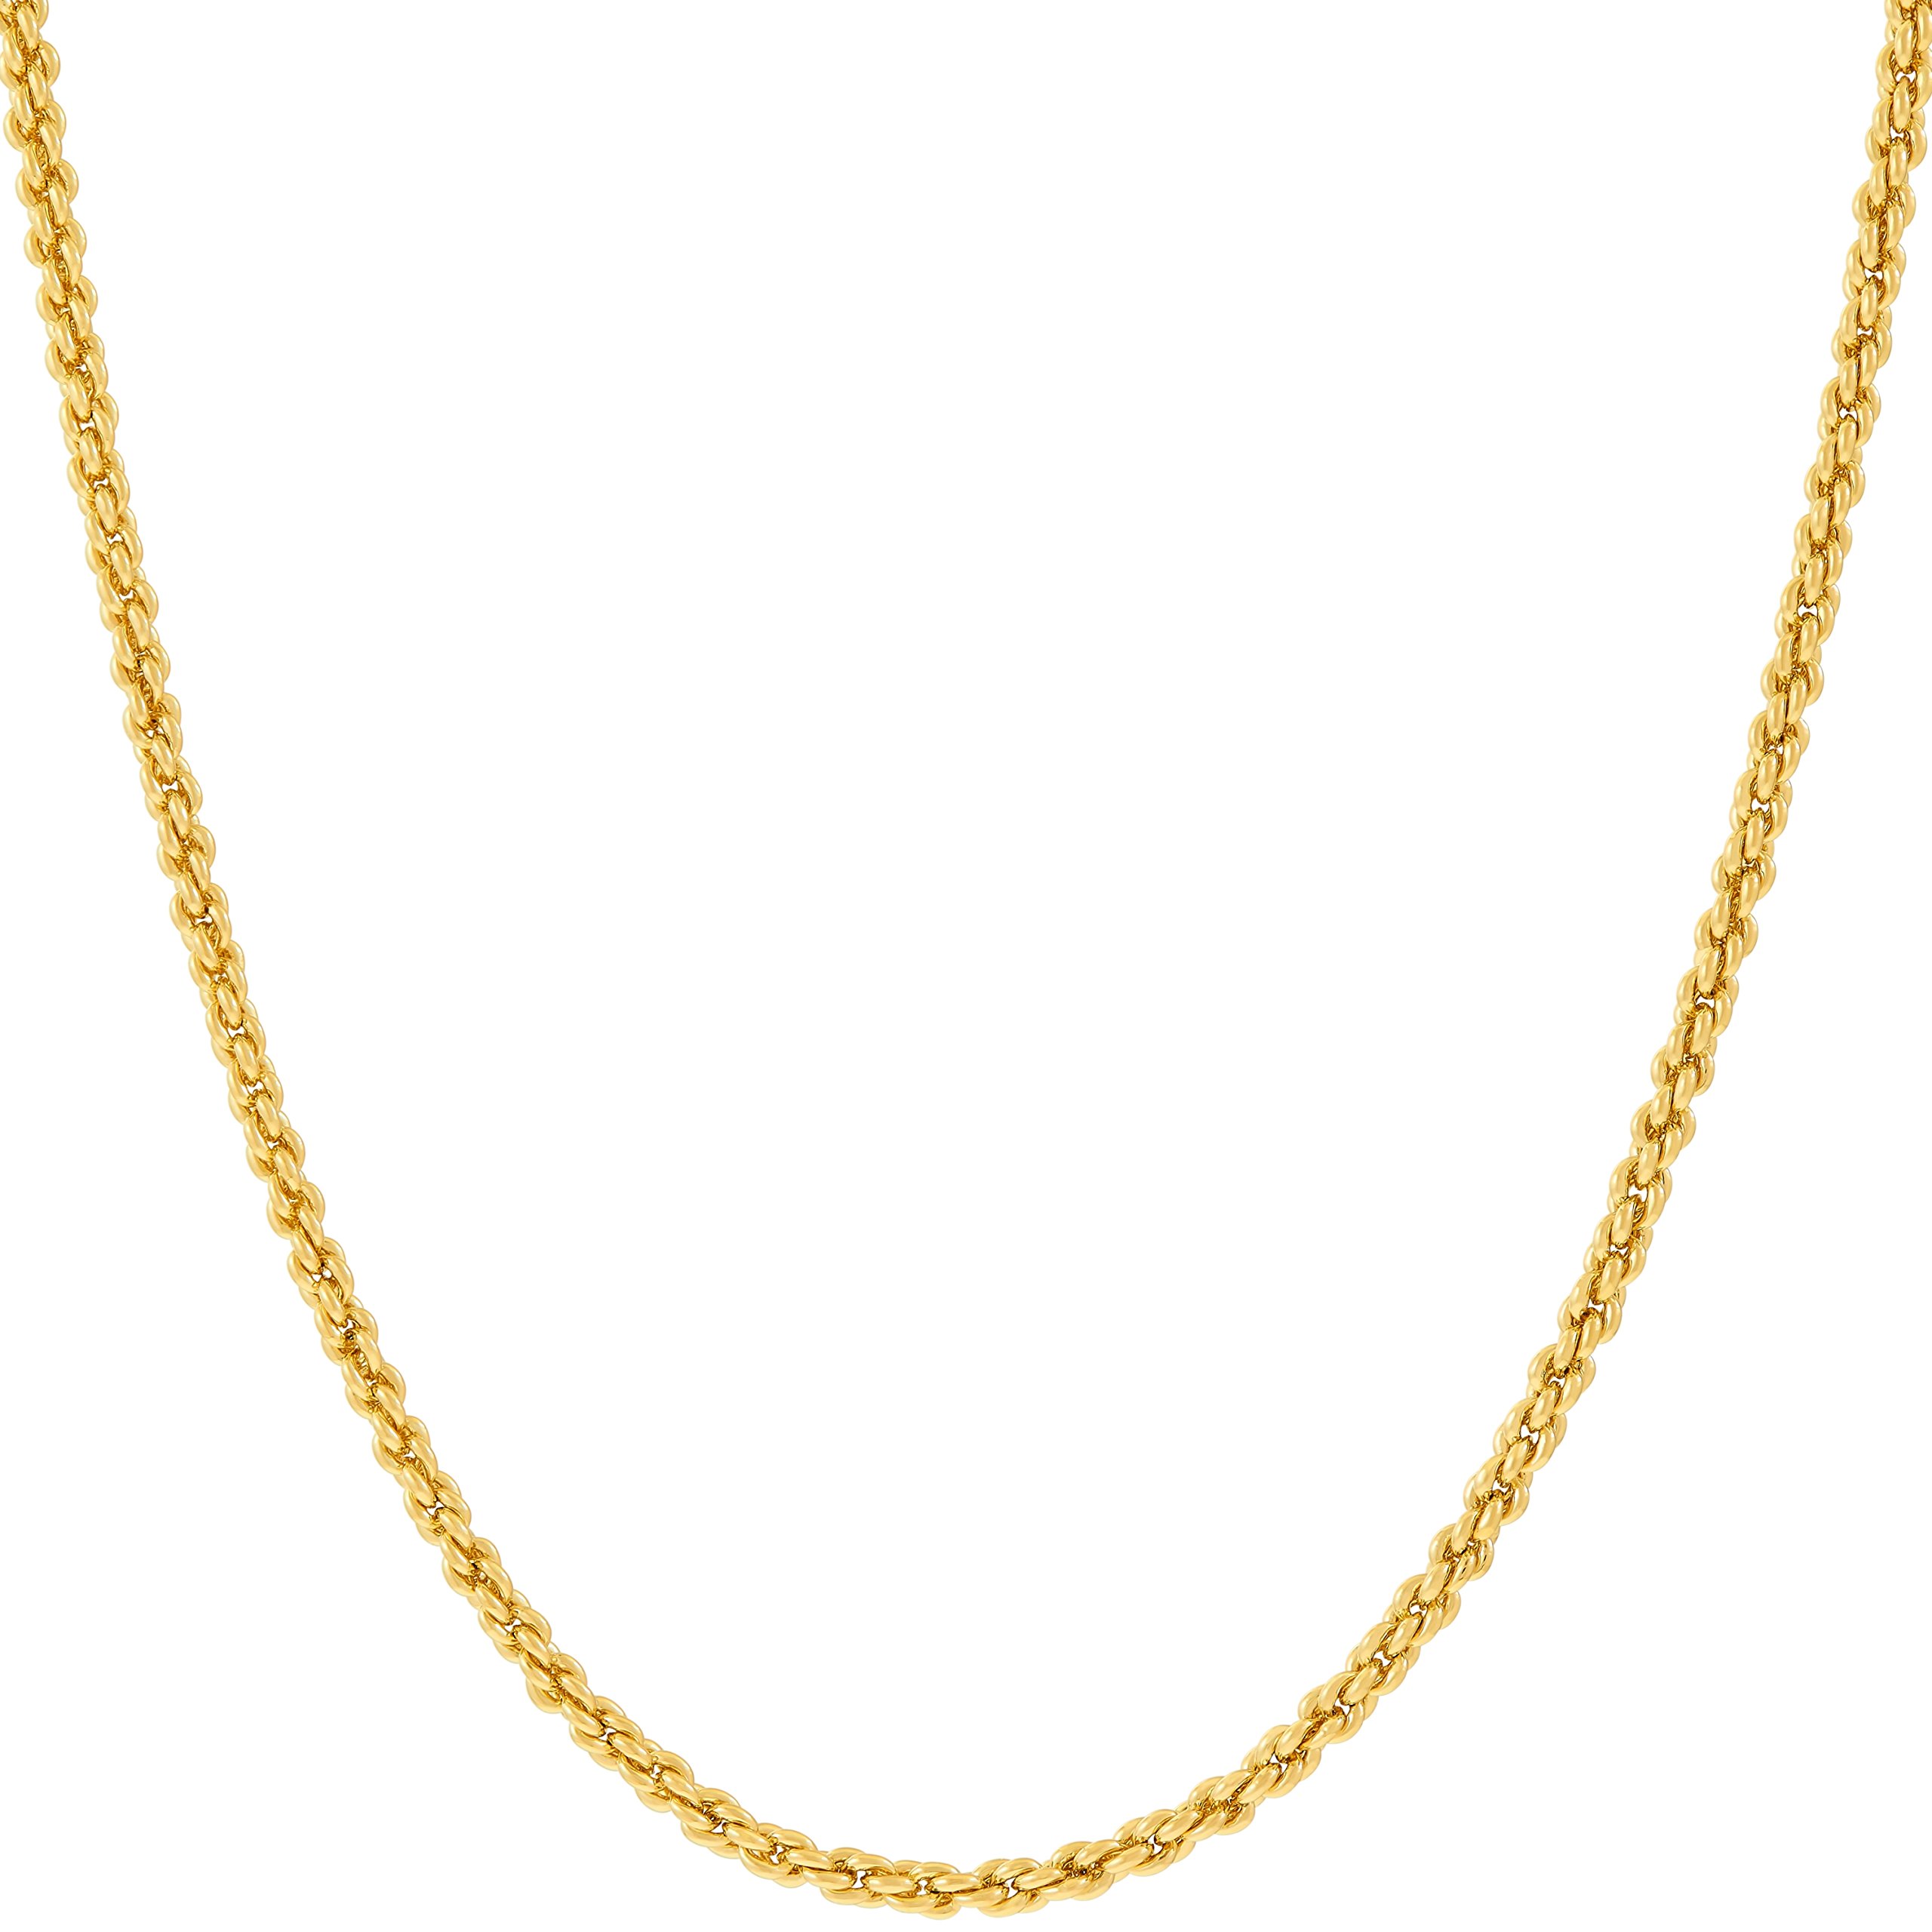 LIFETIME JEWELRY 1mm Gold Necklace for Women & Men 24k Real Gold Plated Thicker Layer Gold Chain Necklace Women Love, Thin Rope Chain Necklace For Men (14 inches)